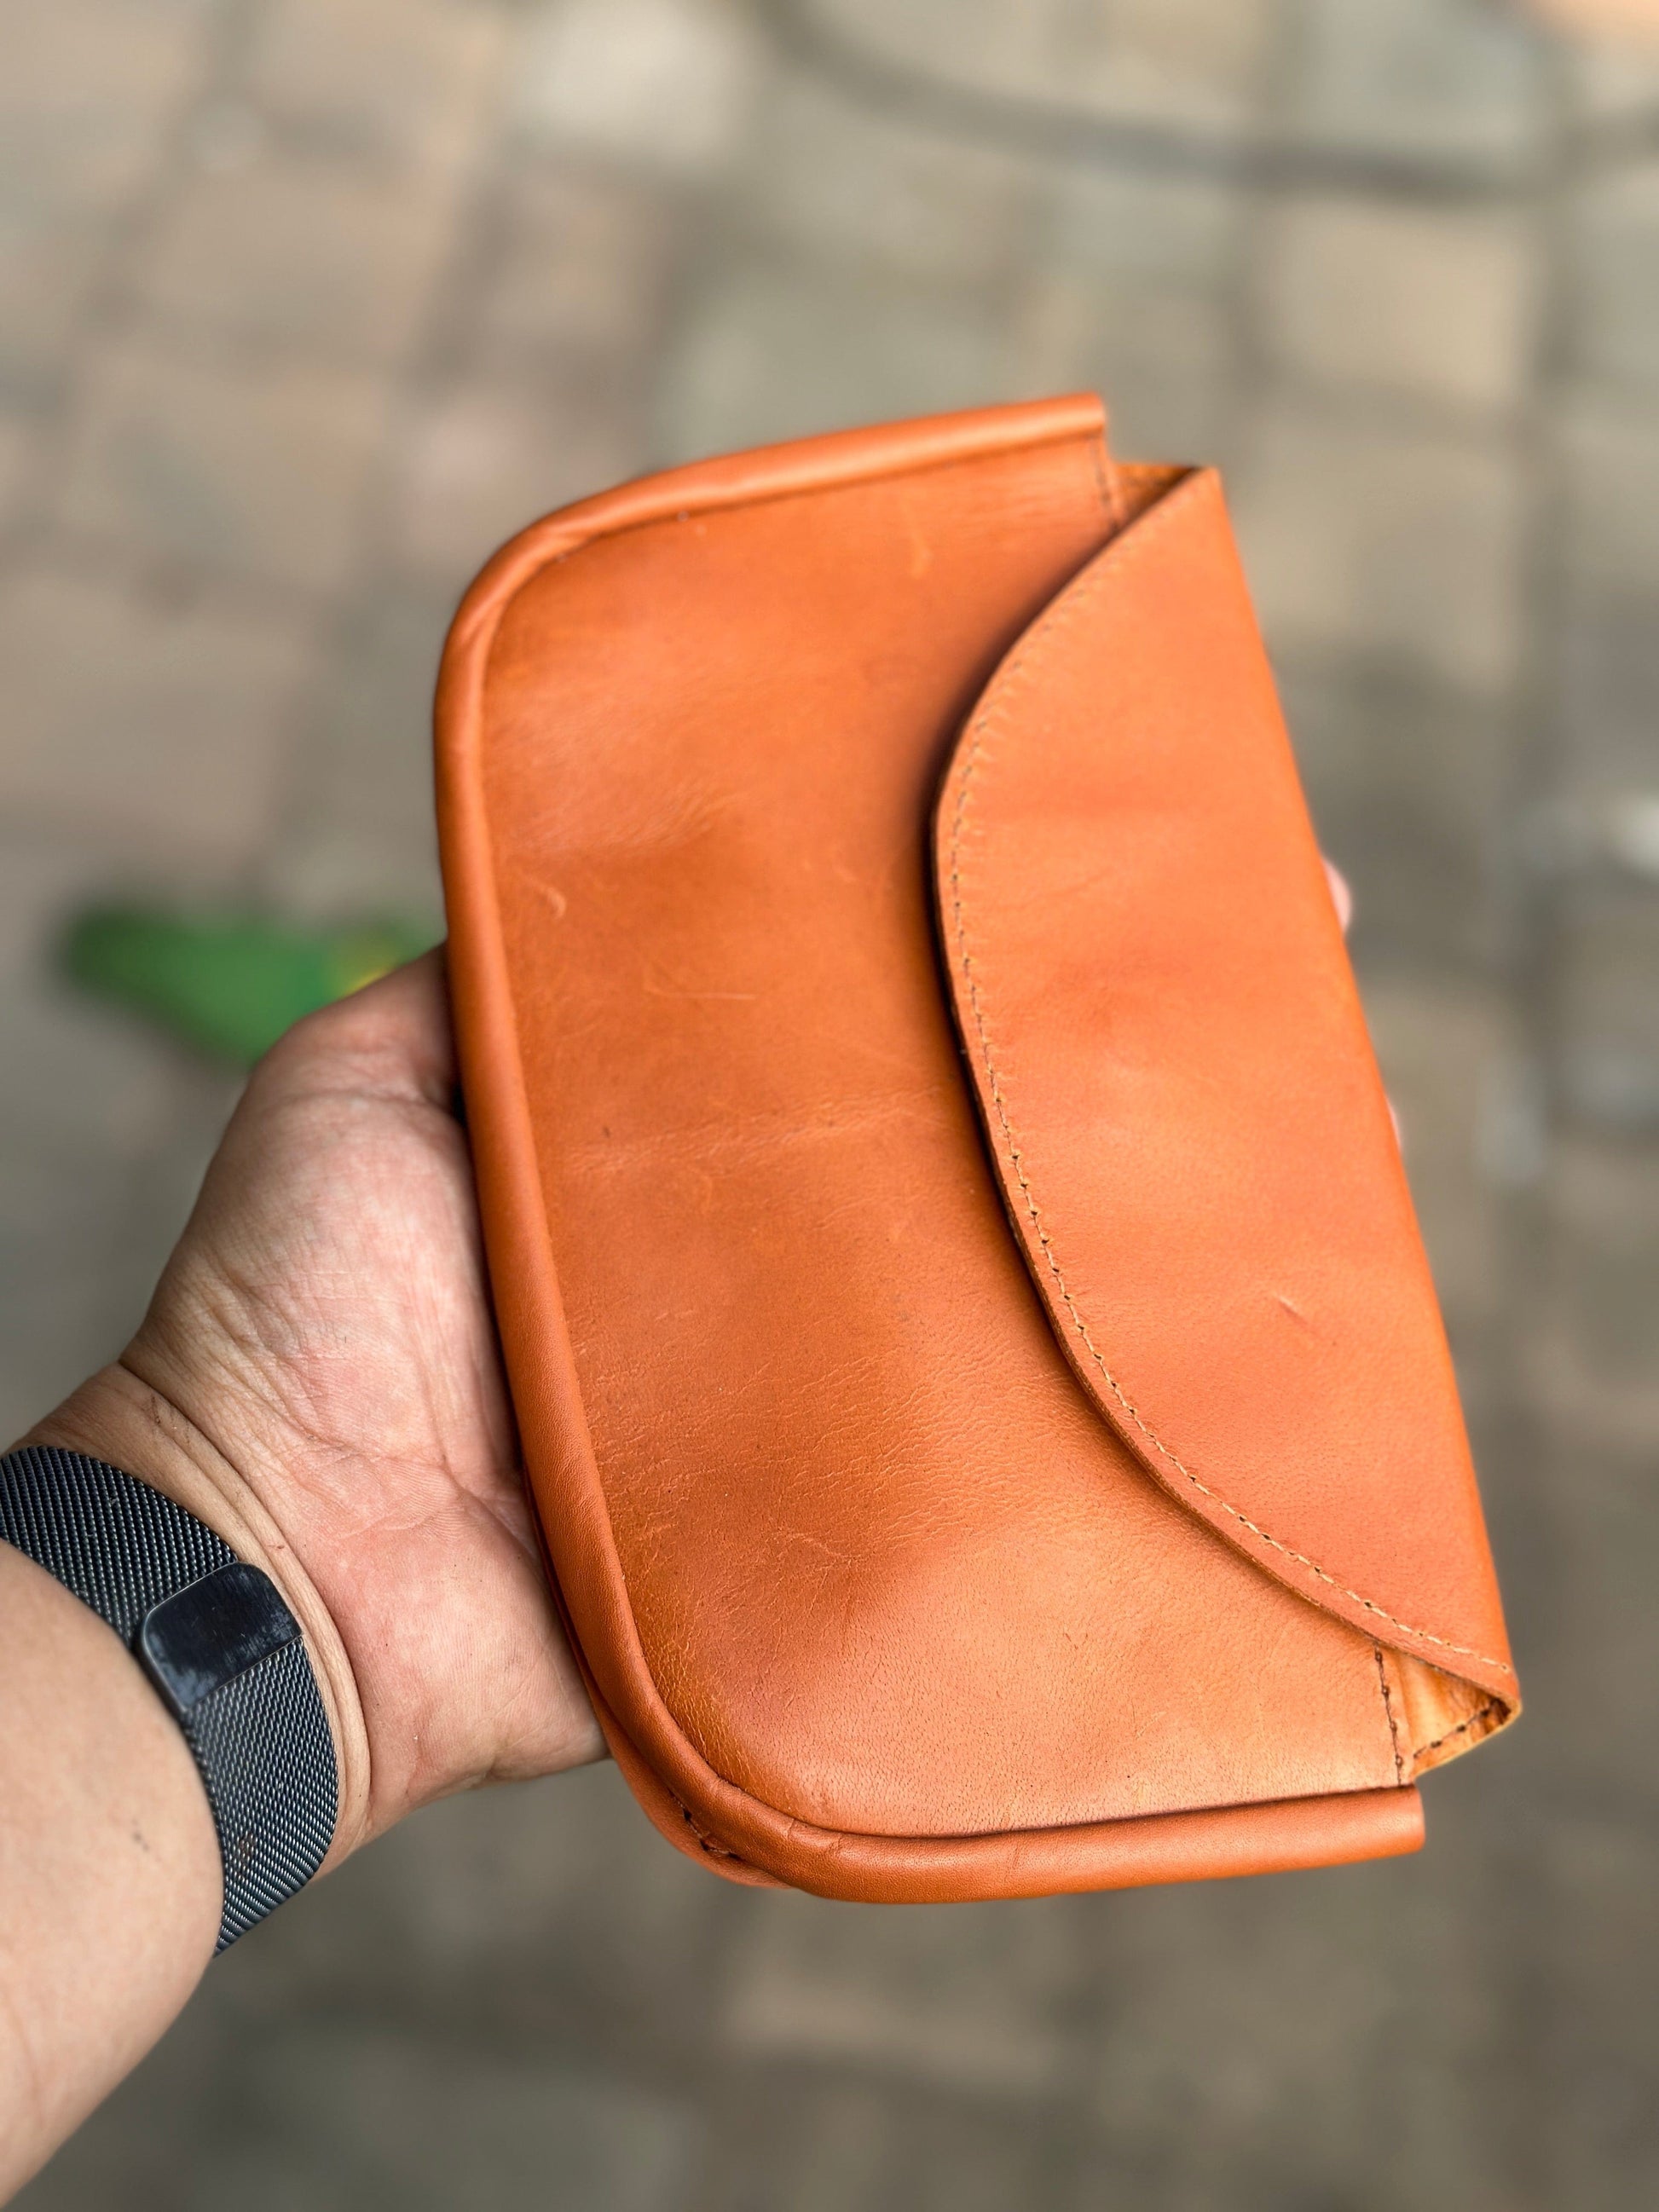 The Real McCaul Purses Phone Holder Pouch for Belt - Horizontal Australian Made Australian Owned Leather Belt Pouch for Phone/Sunglasses Australian Made